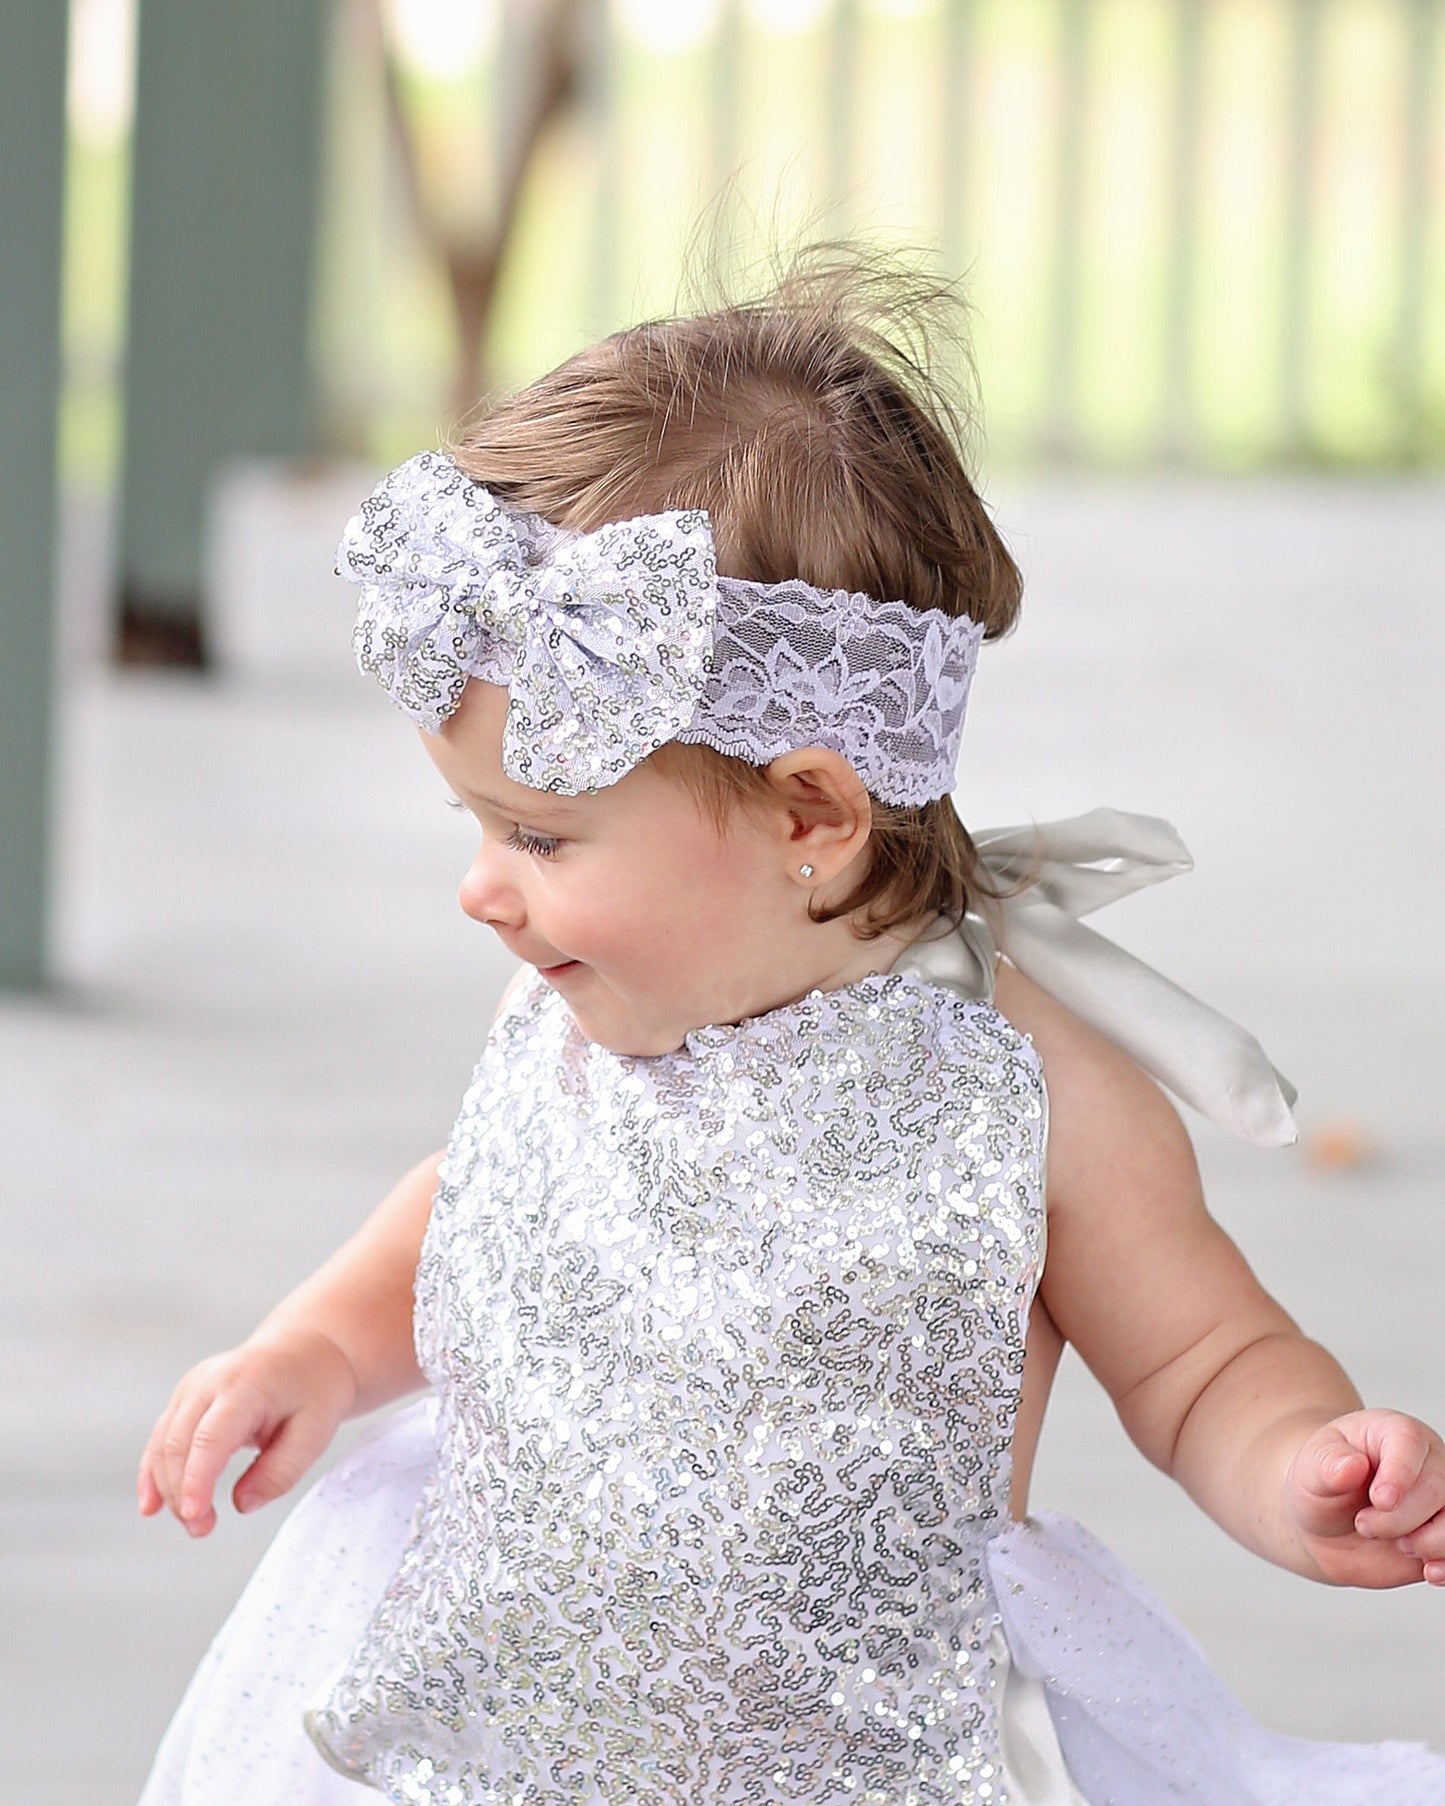 Silver Sequin Bow on Lace Headband - Silver Sequin Headband - Silver Bow